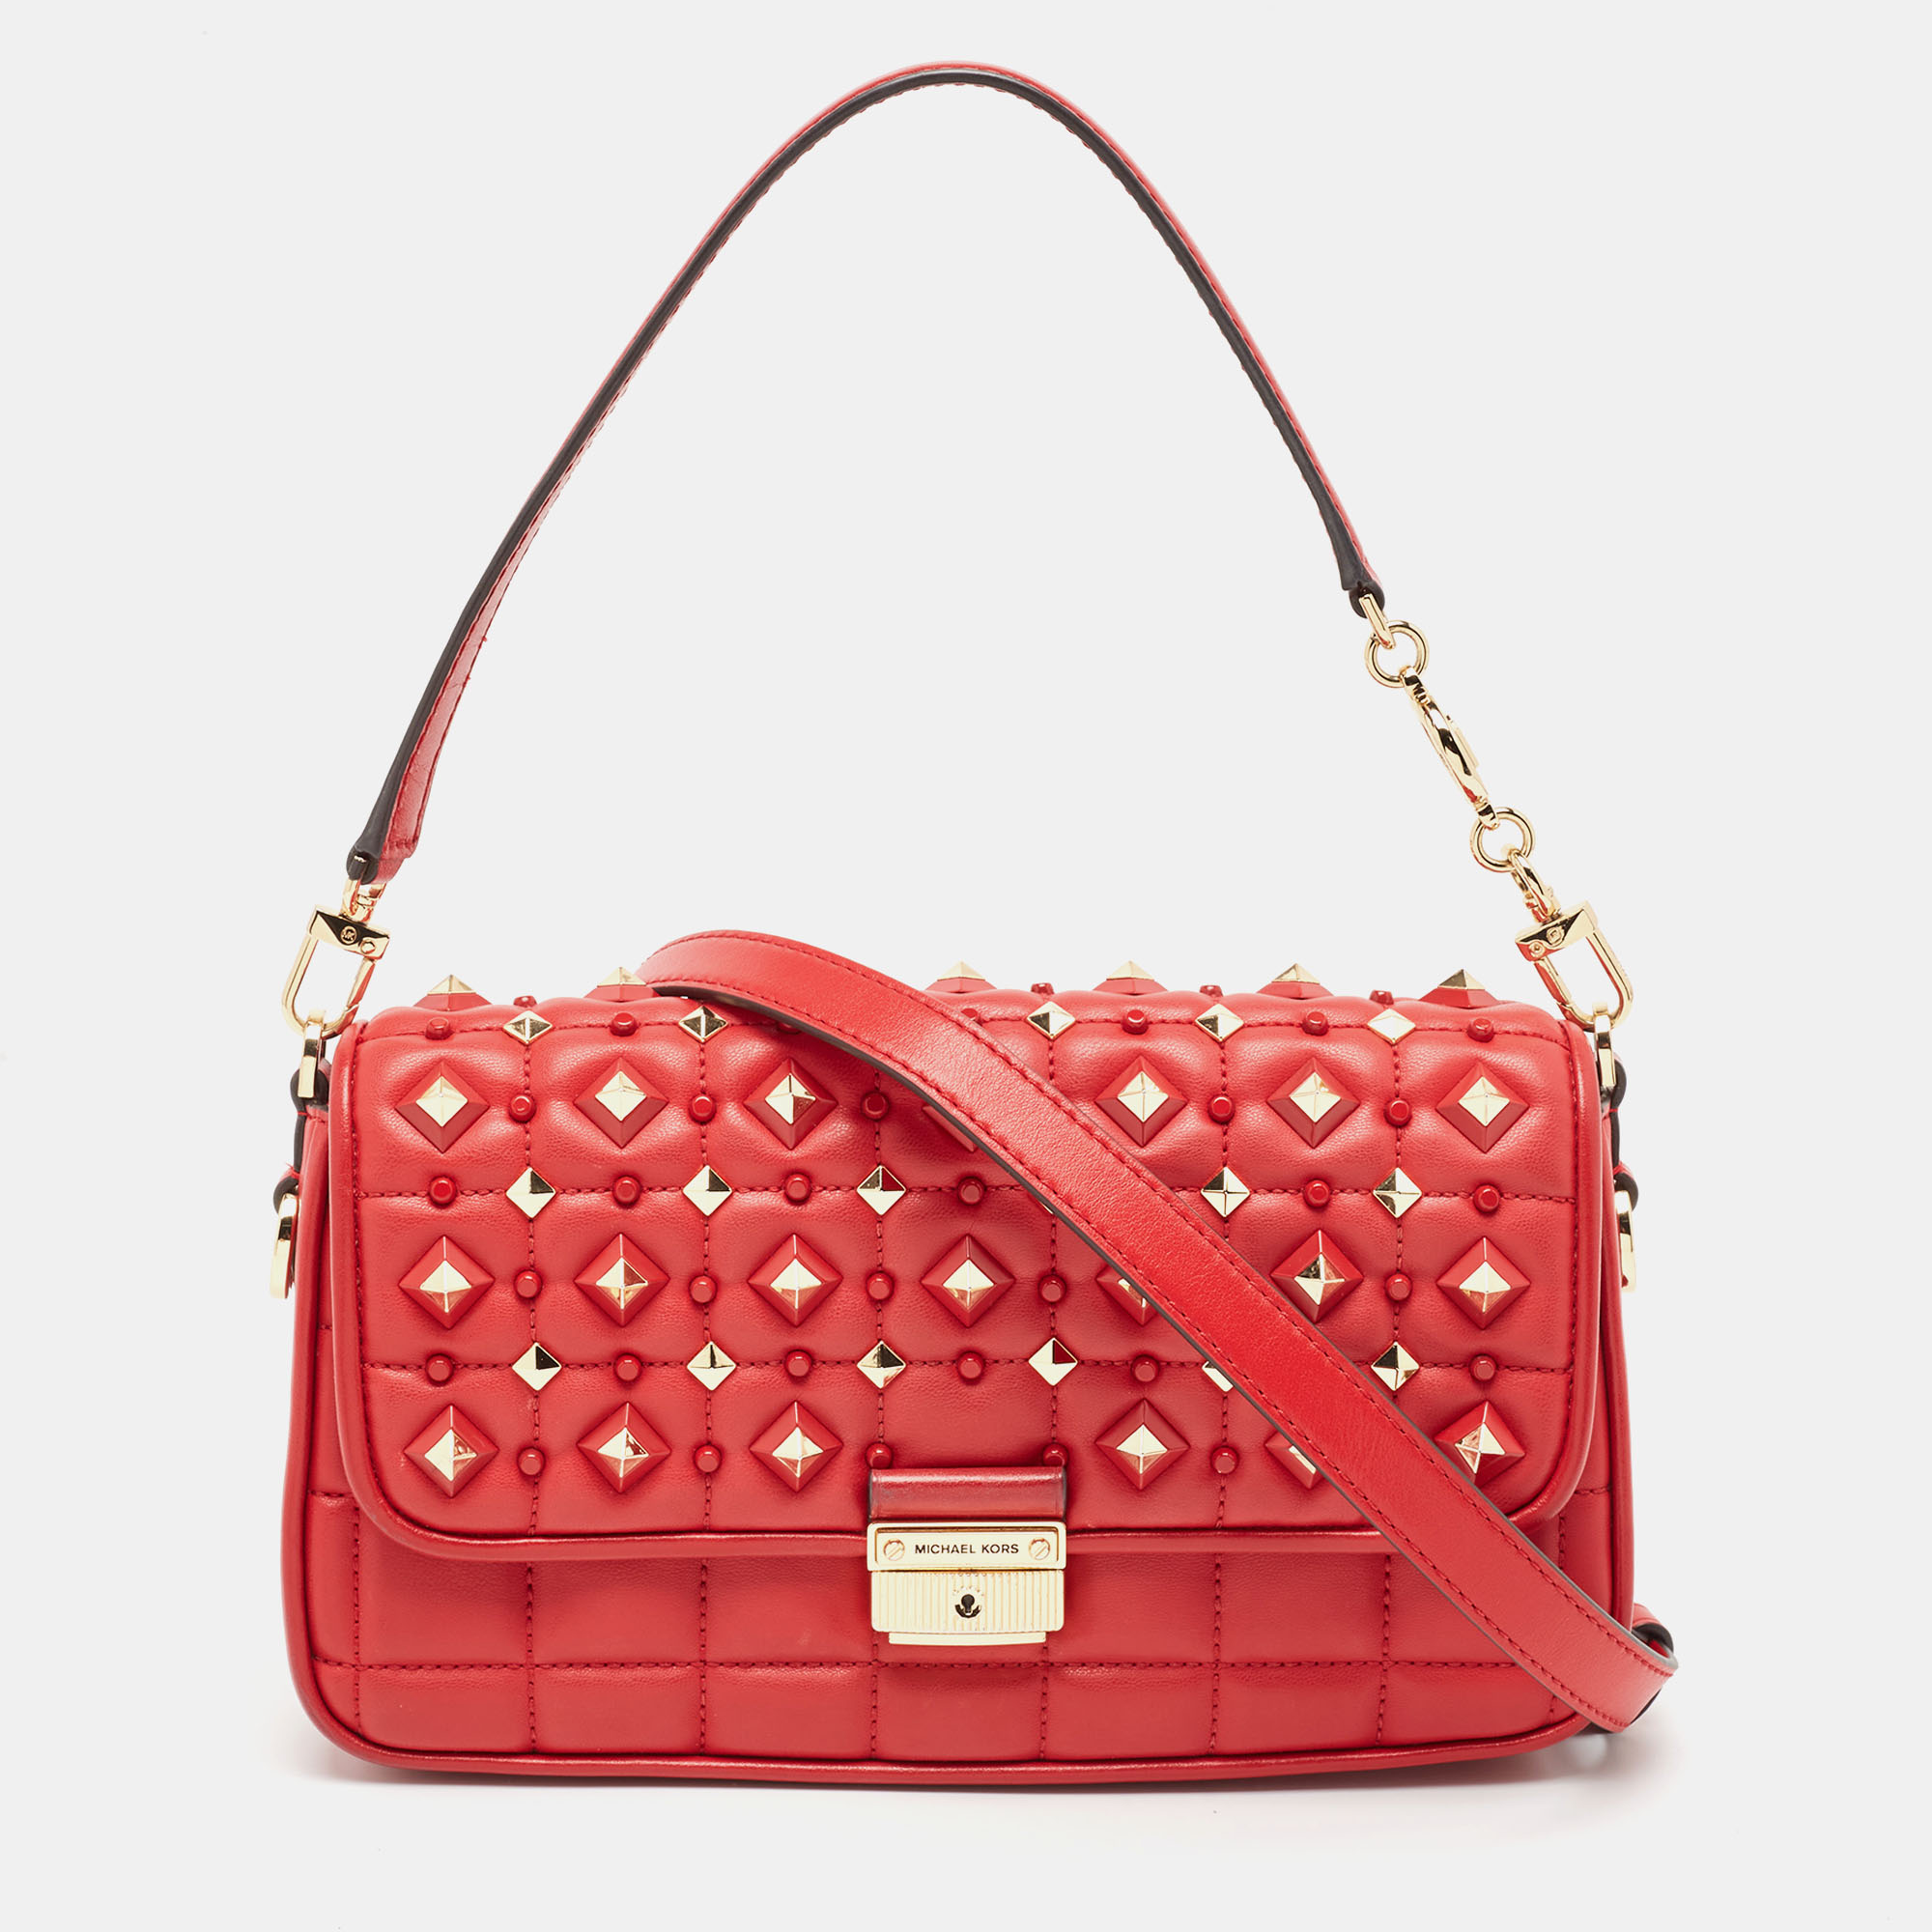 Michael kors red quilted leather small studded bradshaw convertible shoulder bag